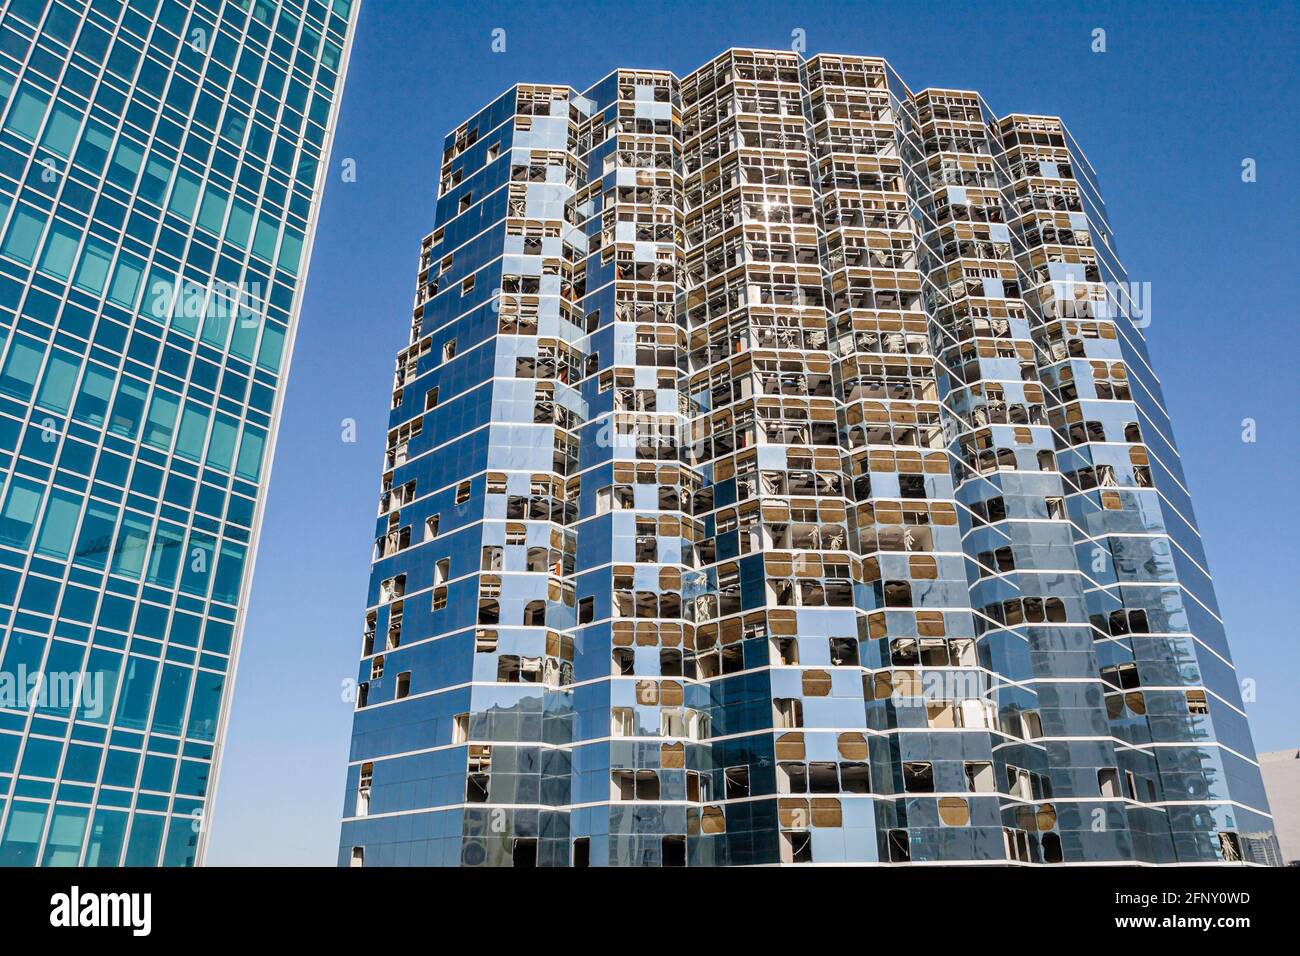 Miami Florida,Brickell Avenue high rise office building,tower windows broken damaged after Hurricane Wilma, Stock Photo